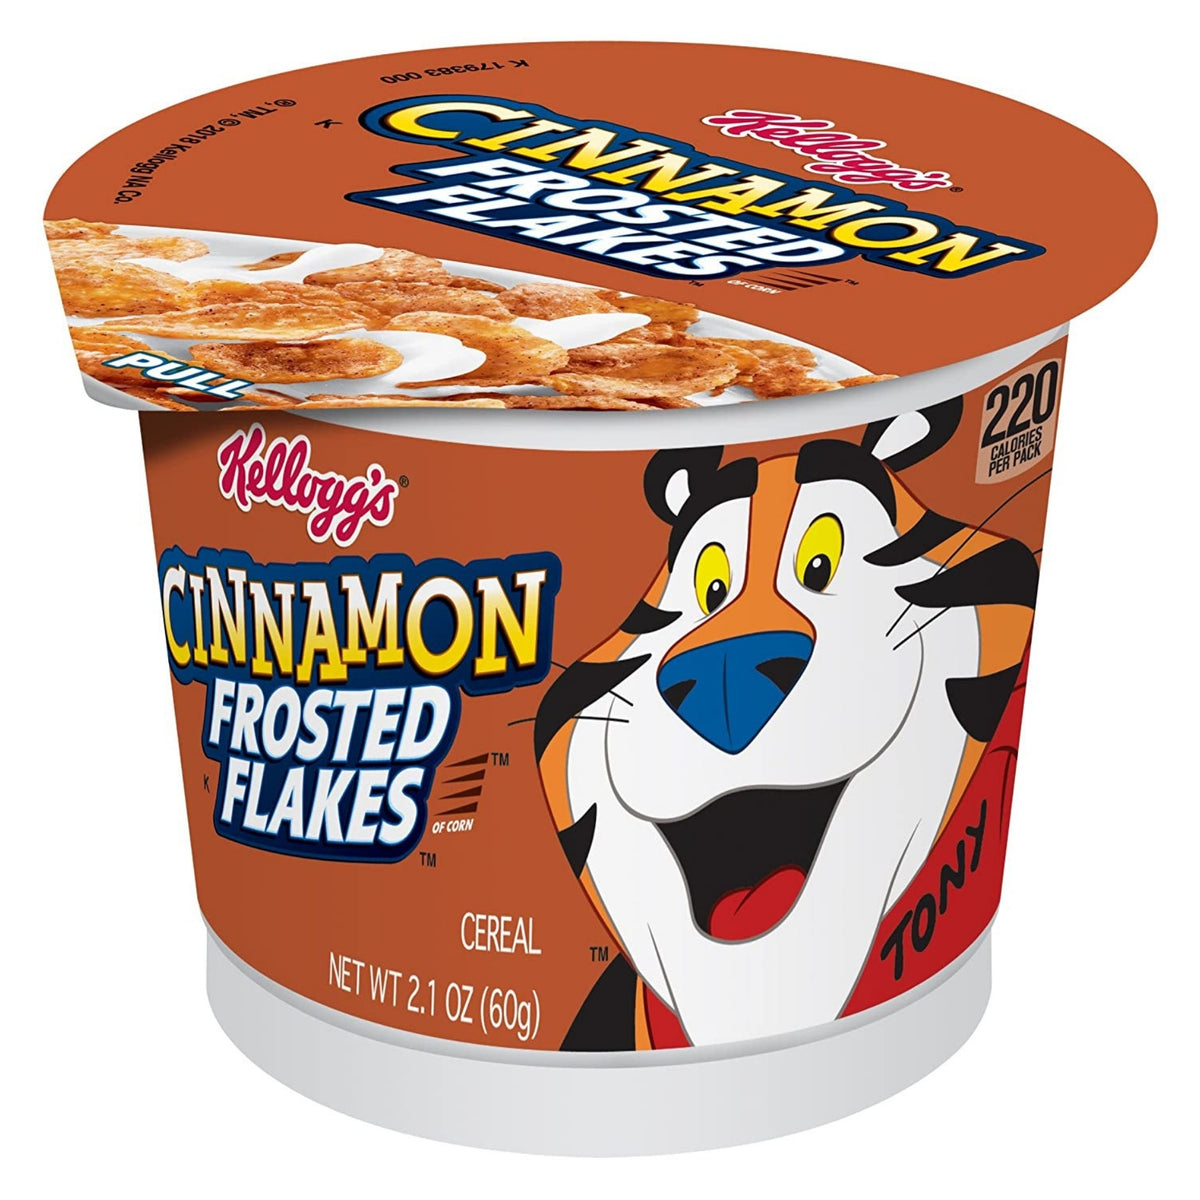 Frosted Flakes Cinnamon Cereal In a Cup - 2.1oz